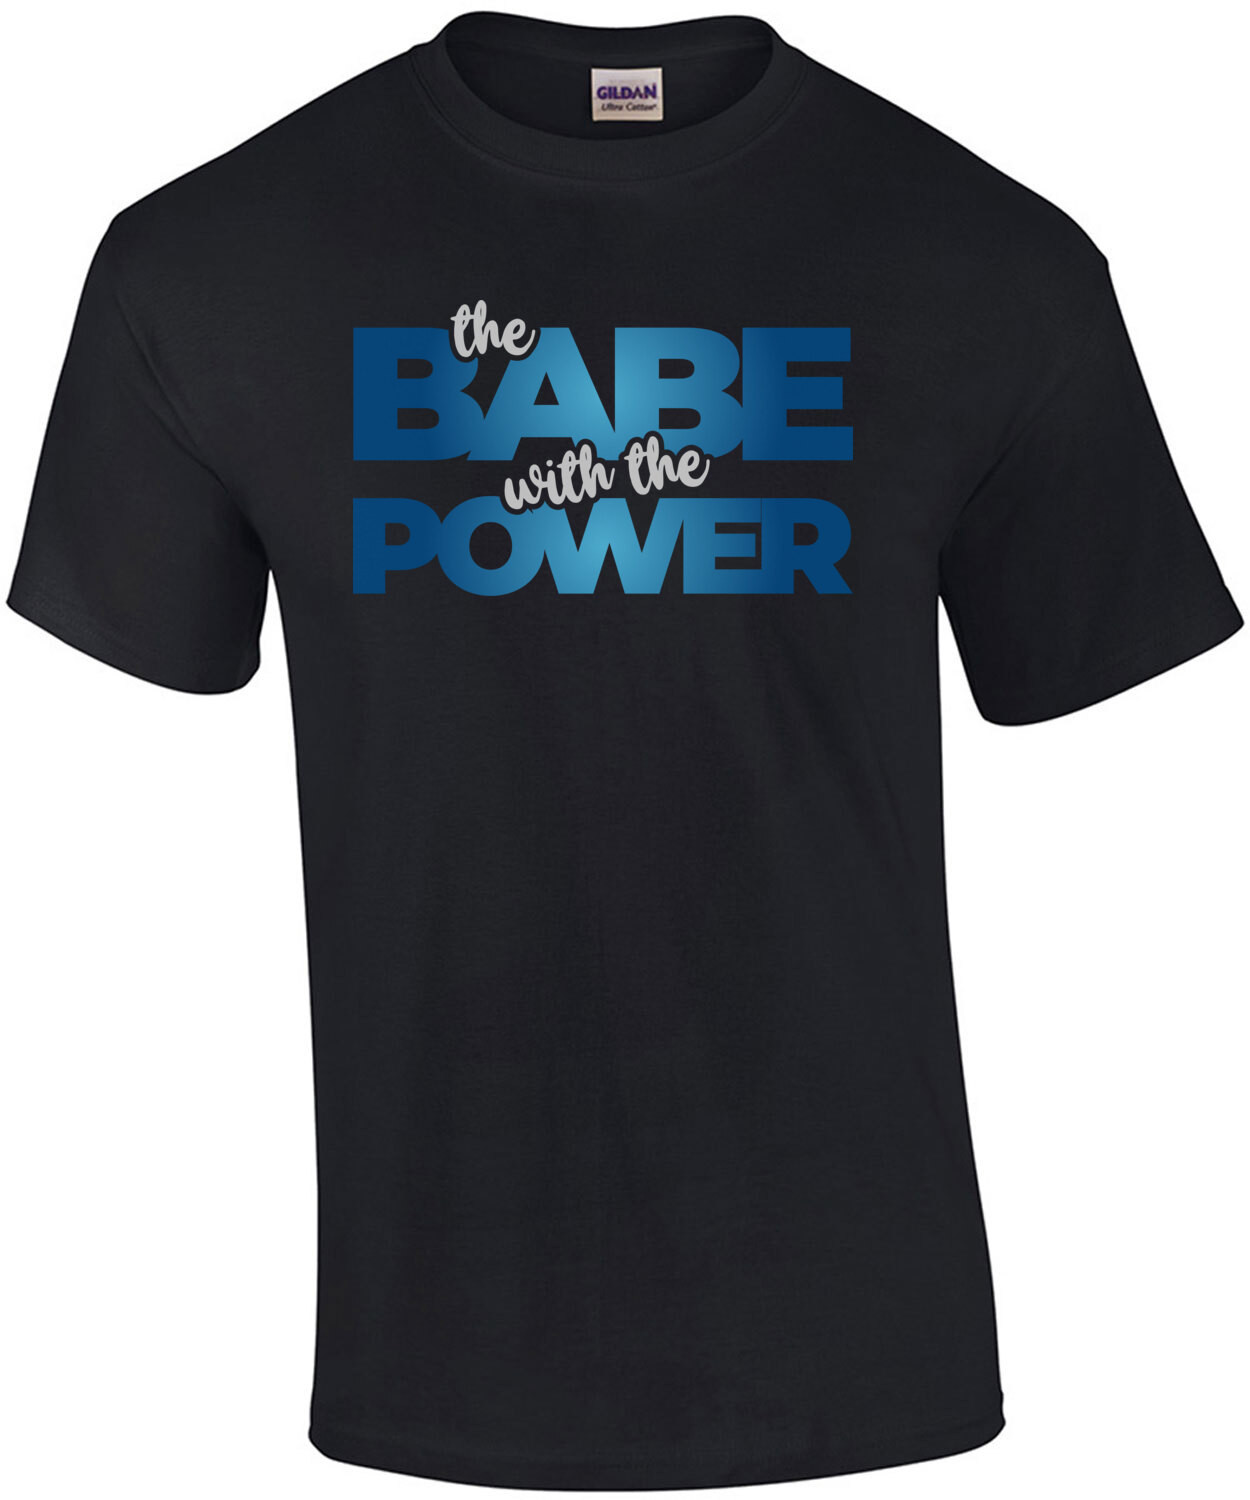 The Babe with the Power - David Bowie - Labyrinth 80's T-Shirt